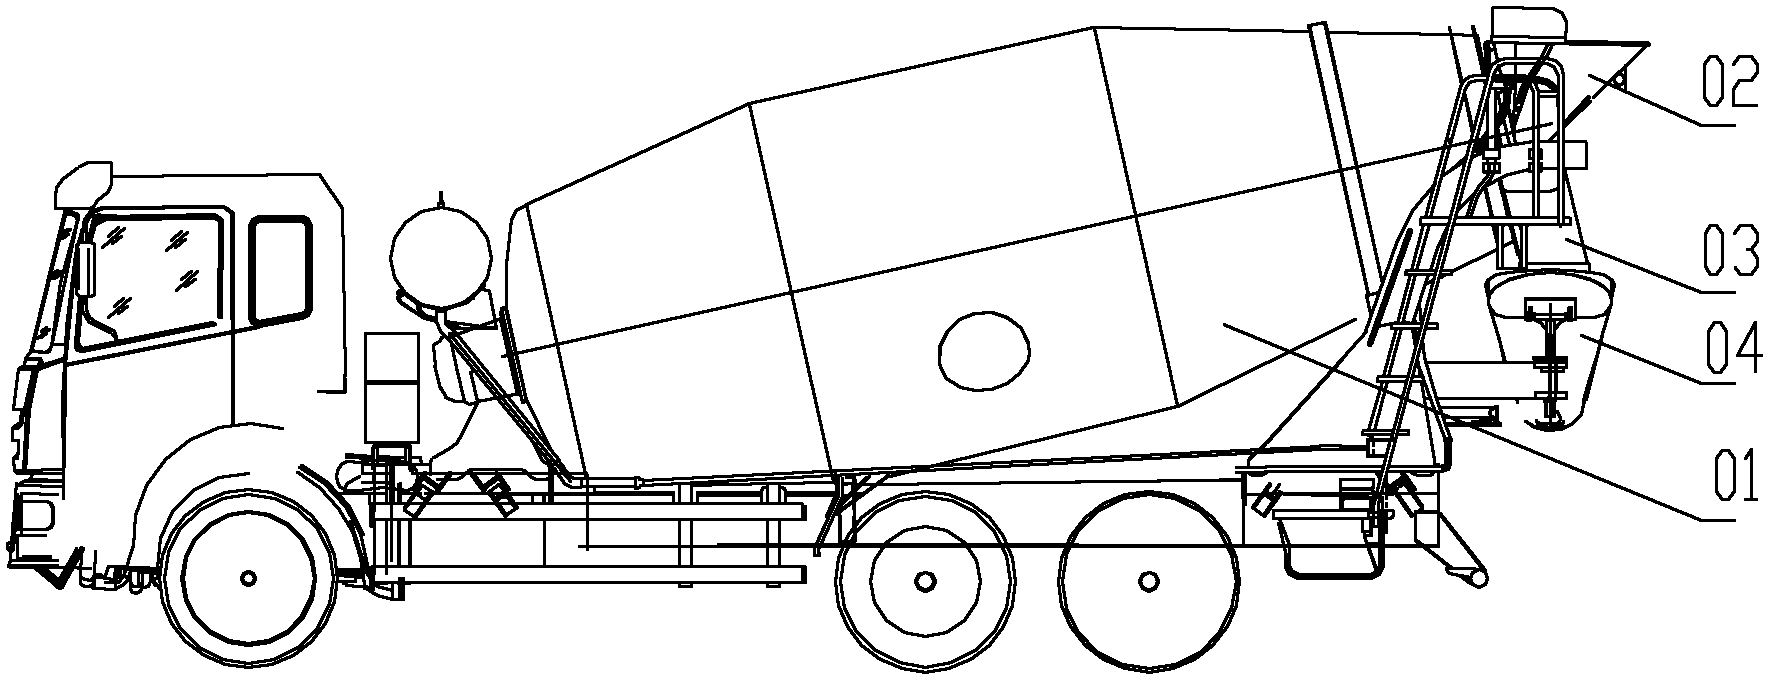 Automatic discharge system and concrete mixing vehicle